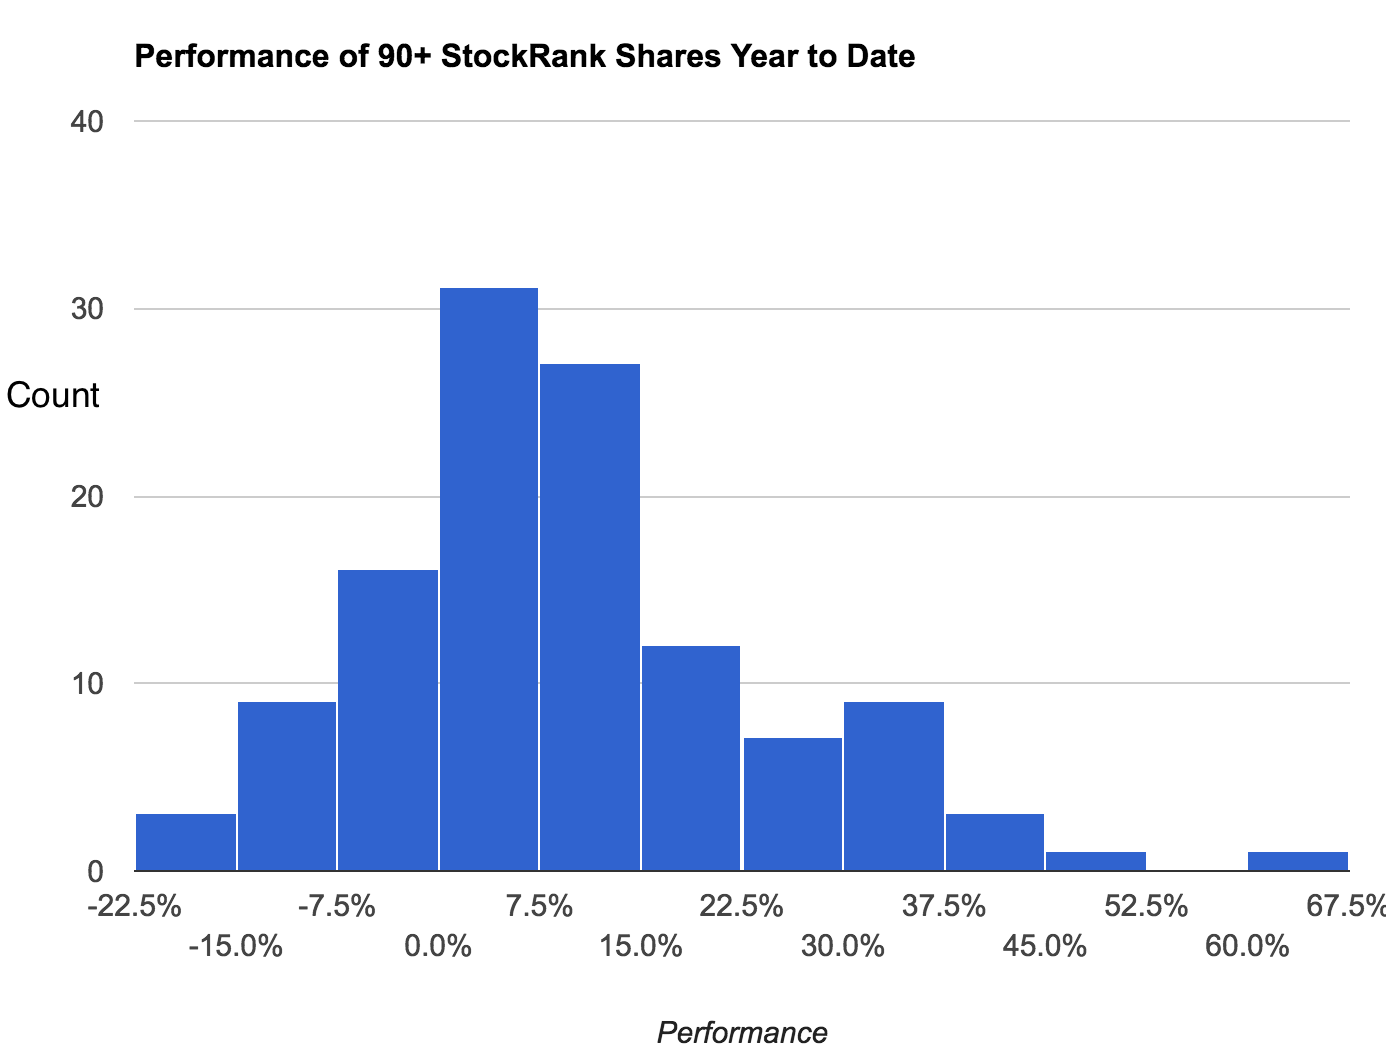 Performance of 90+ StockRanks Year to Date